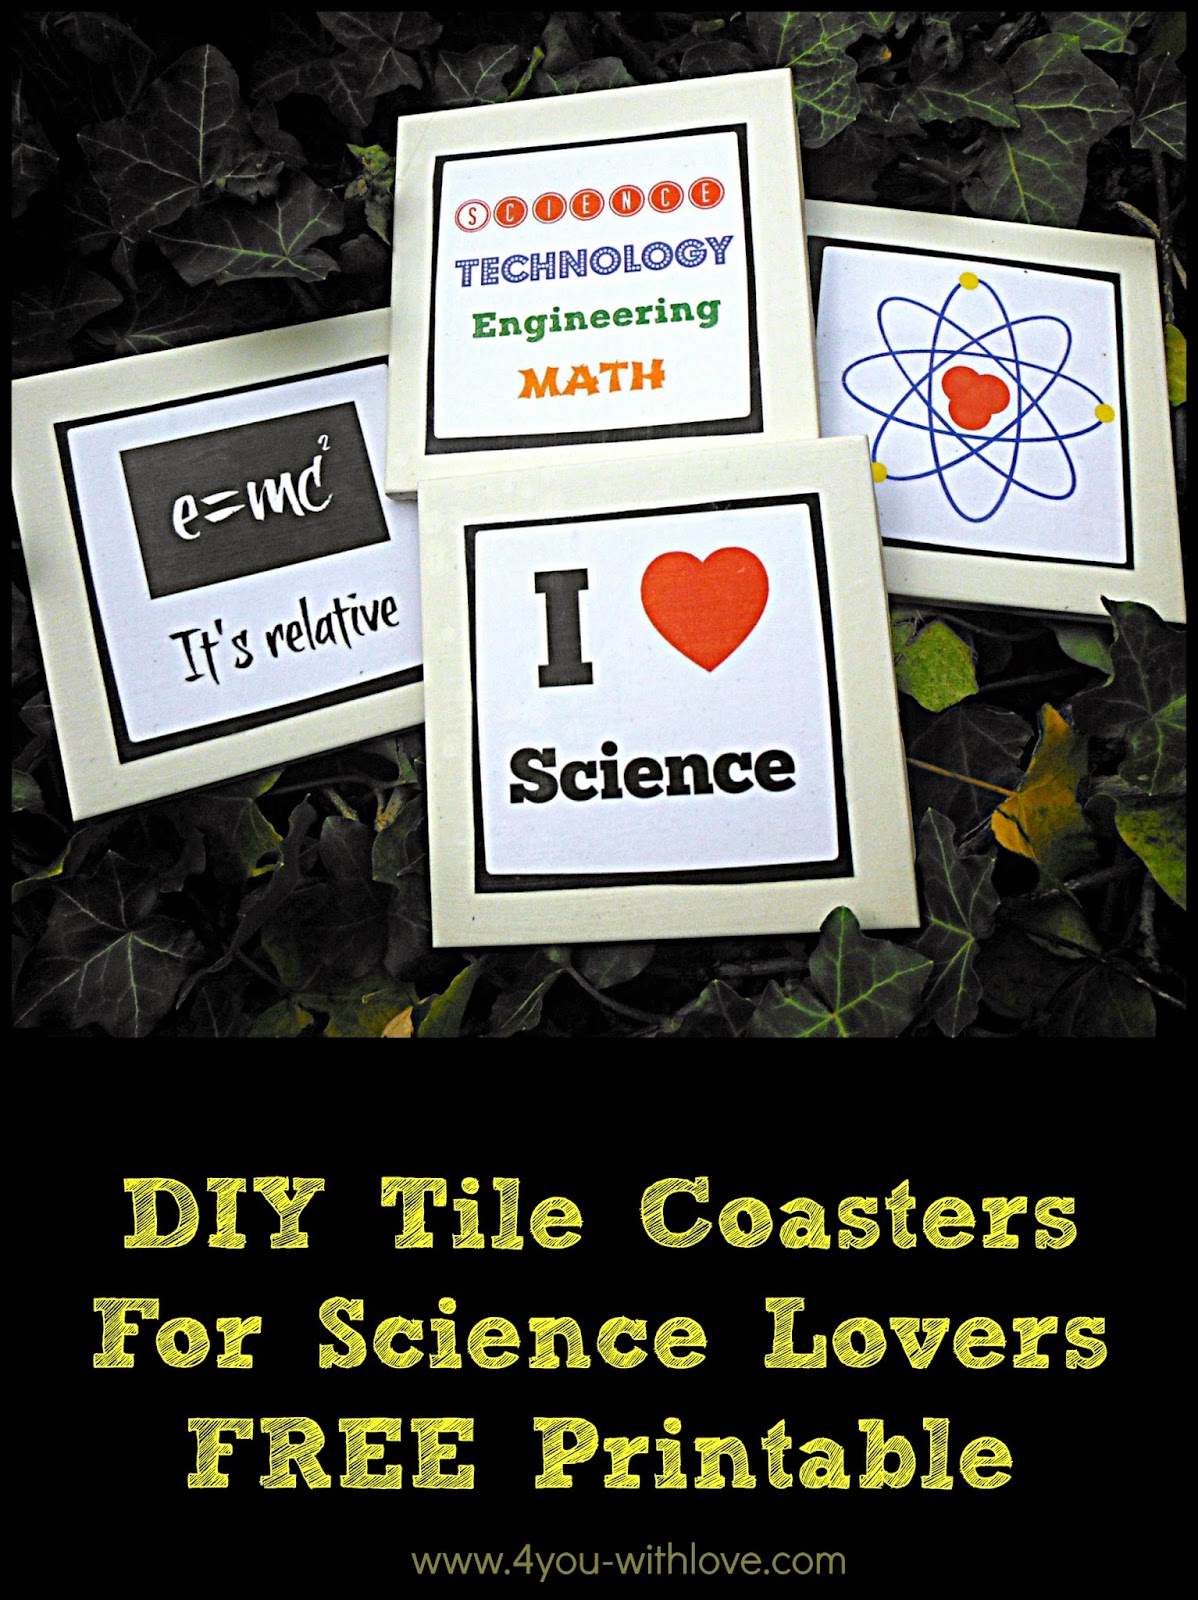 DIY Tile Coasters for Science Lovers – FREE Printable